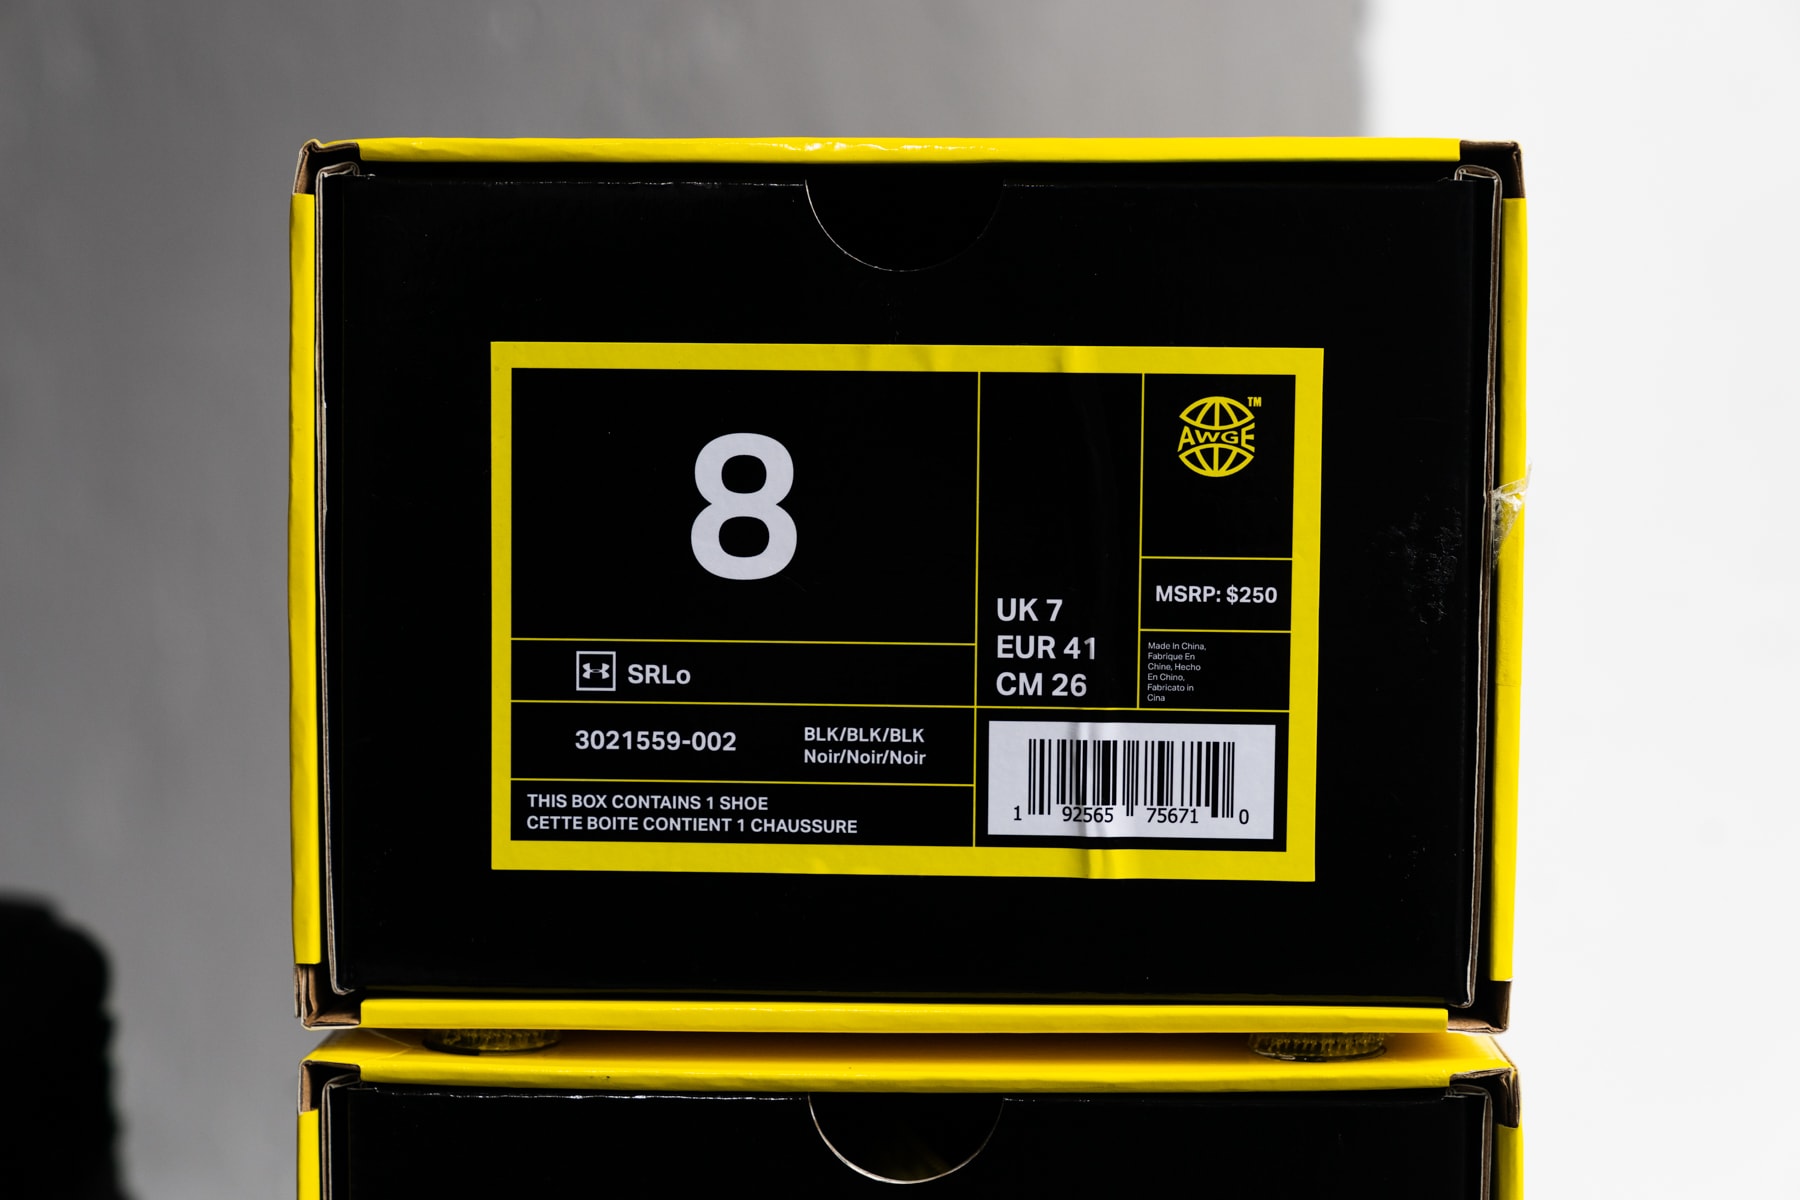 A$AP Rocky x Under Armour SRLo Release Date